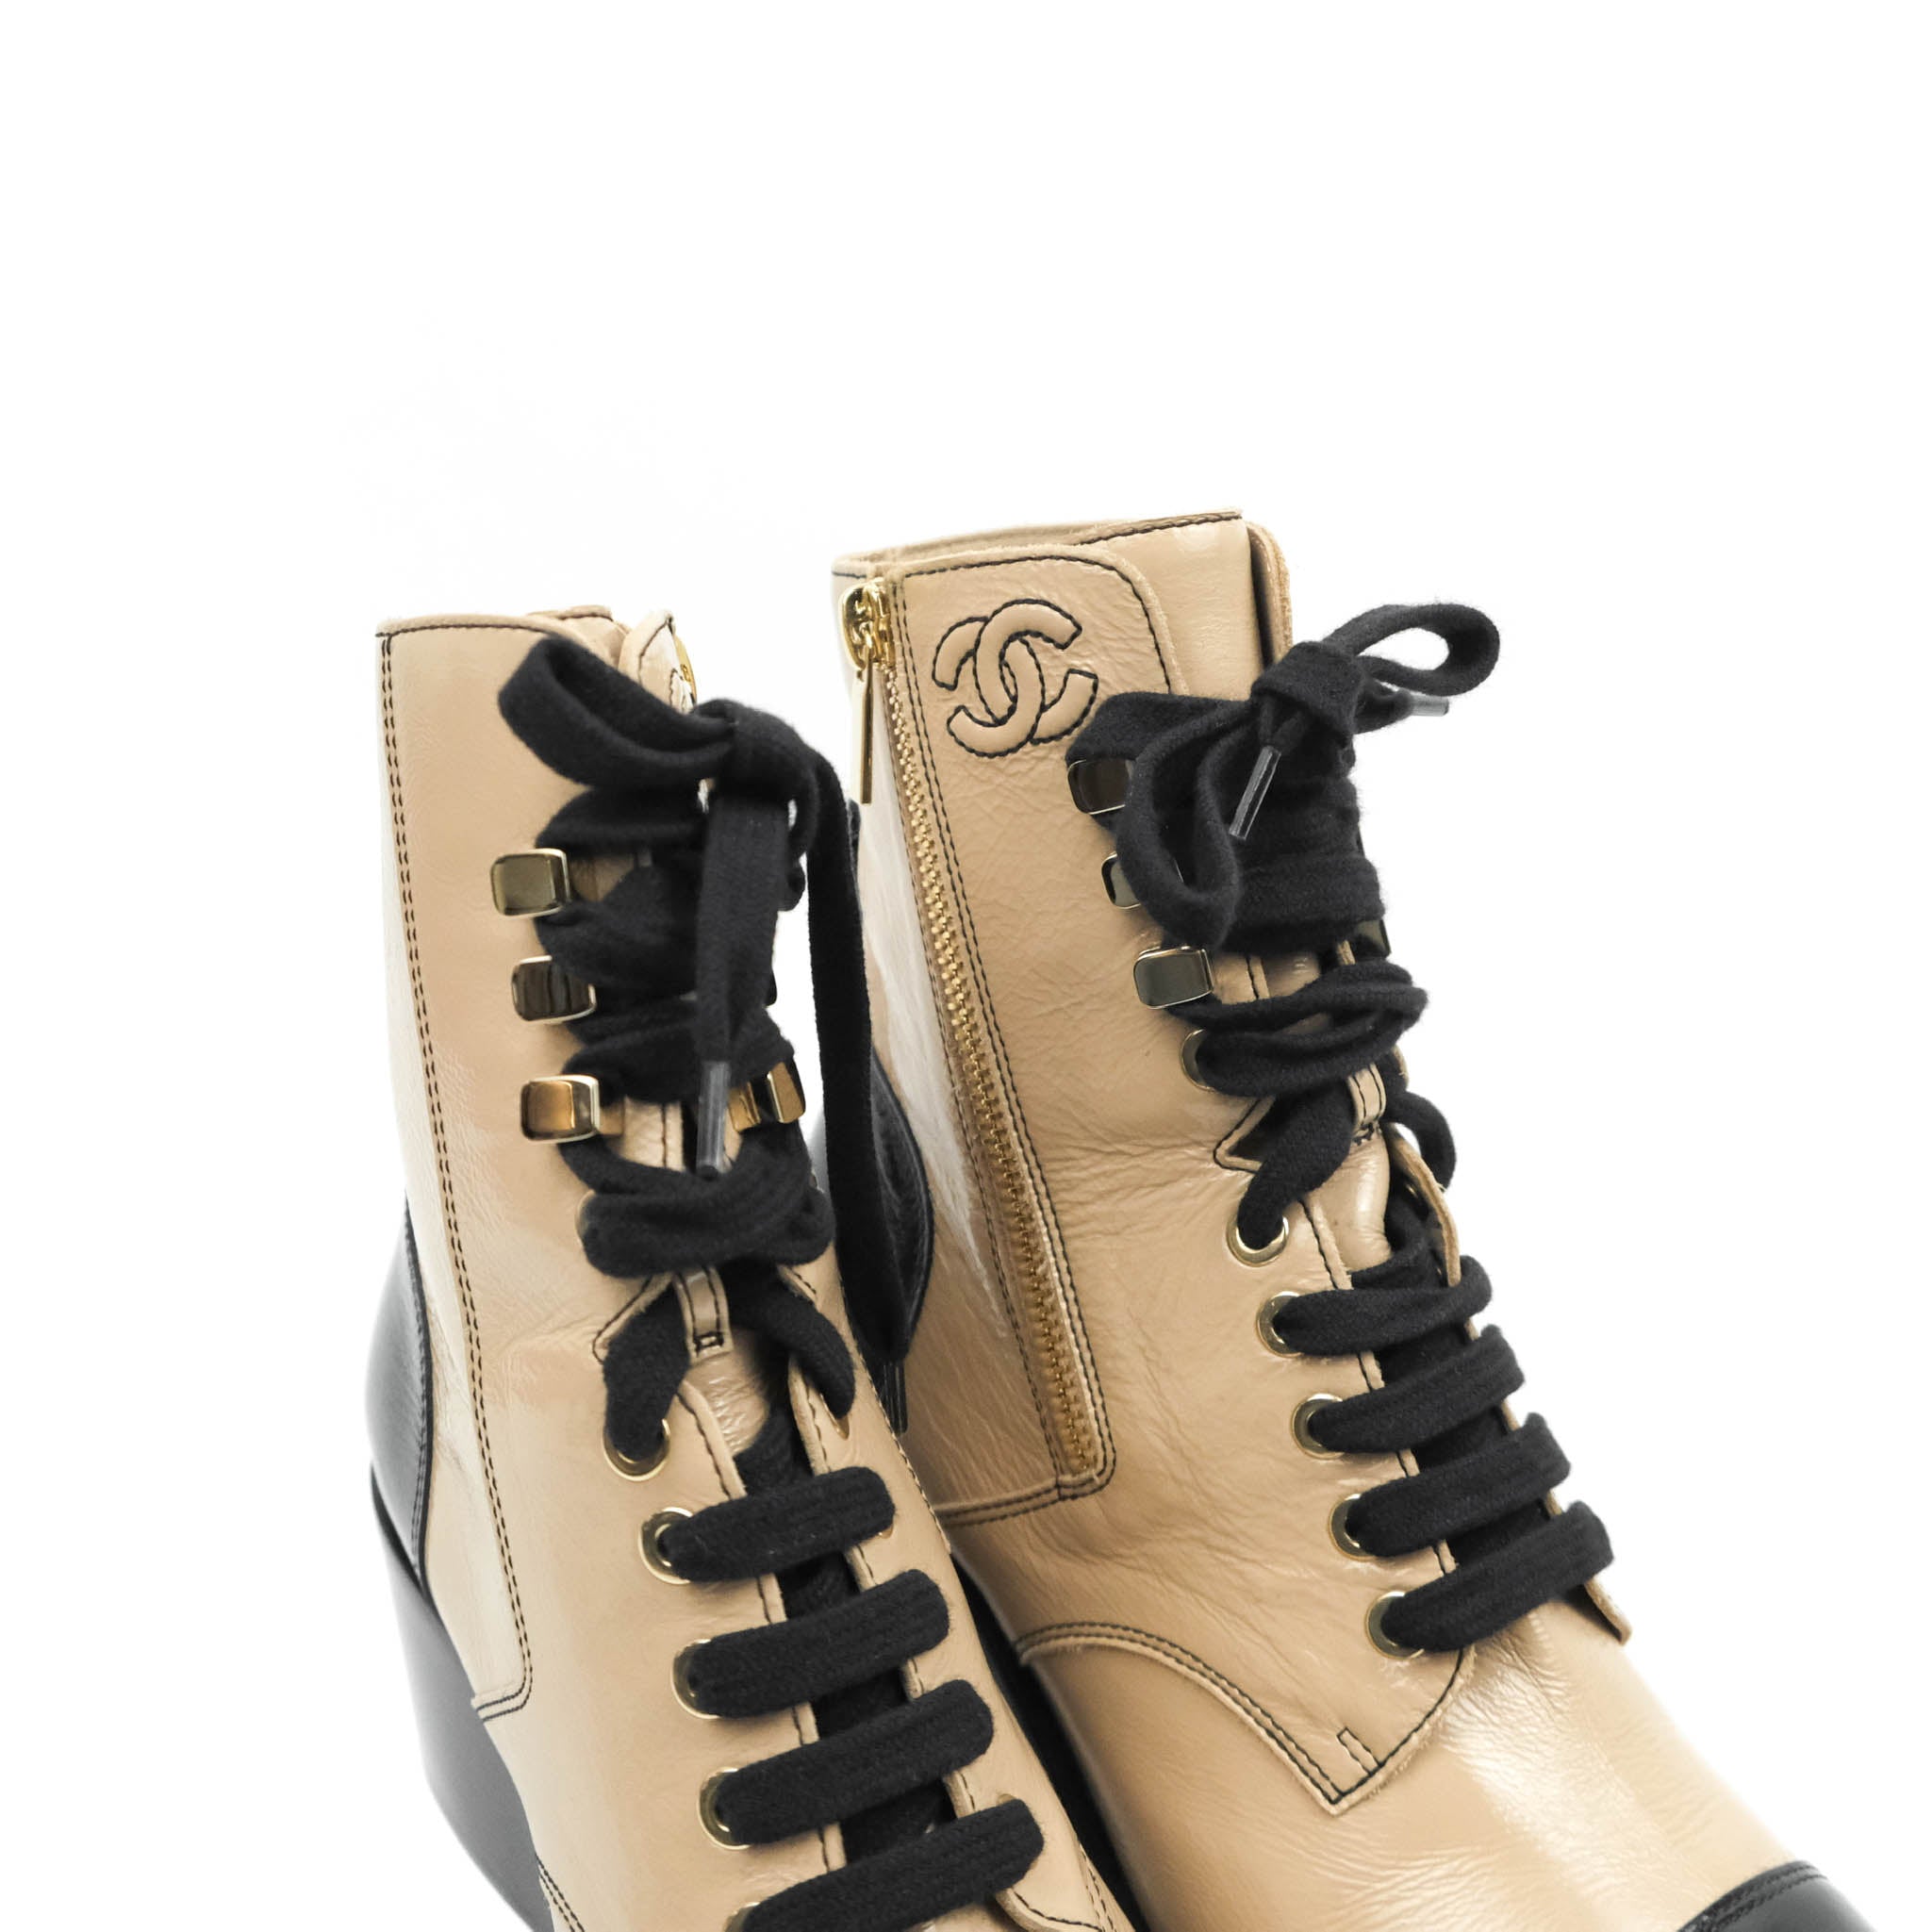 CHANEL, Shoes, Chanel Lace Up Boots